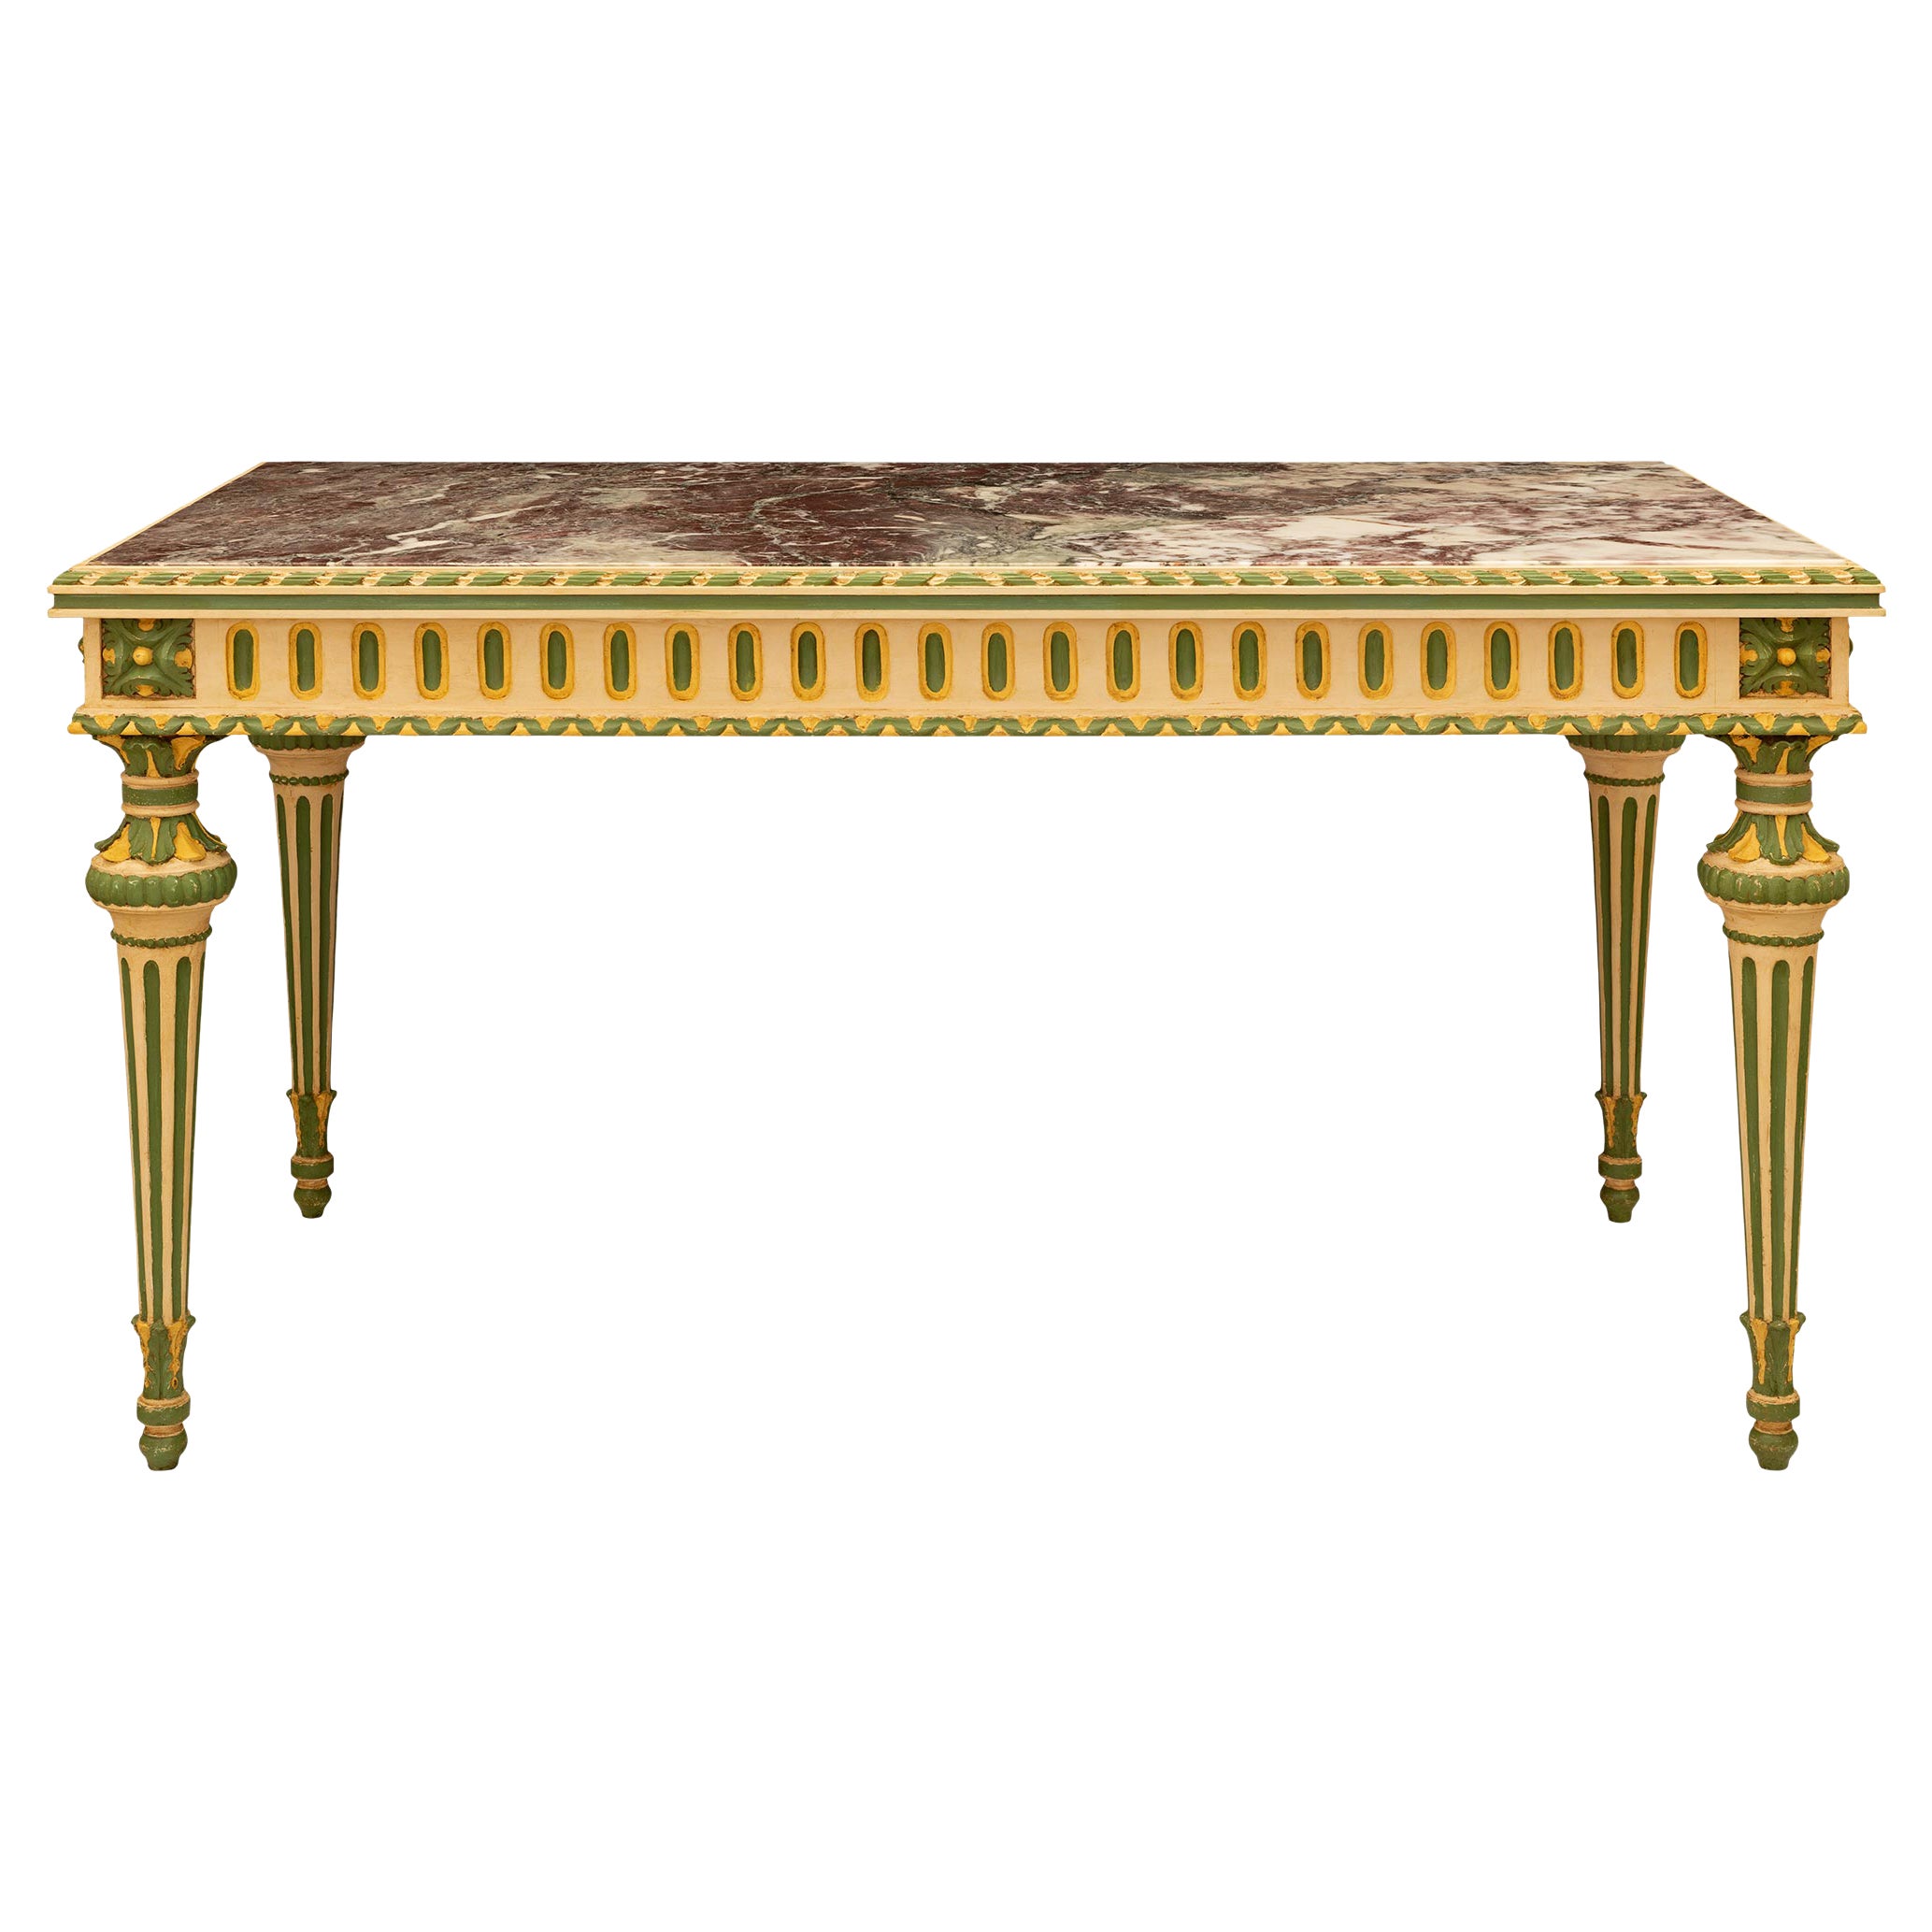 Italian 19th Century Louis XVI St. Patinated Wood and Marble Center Table